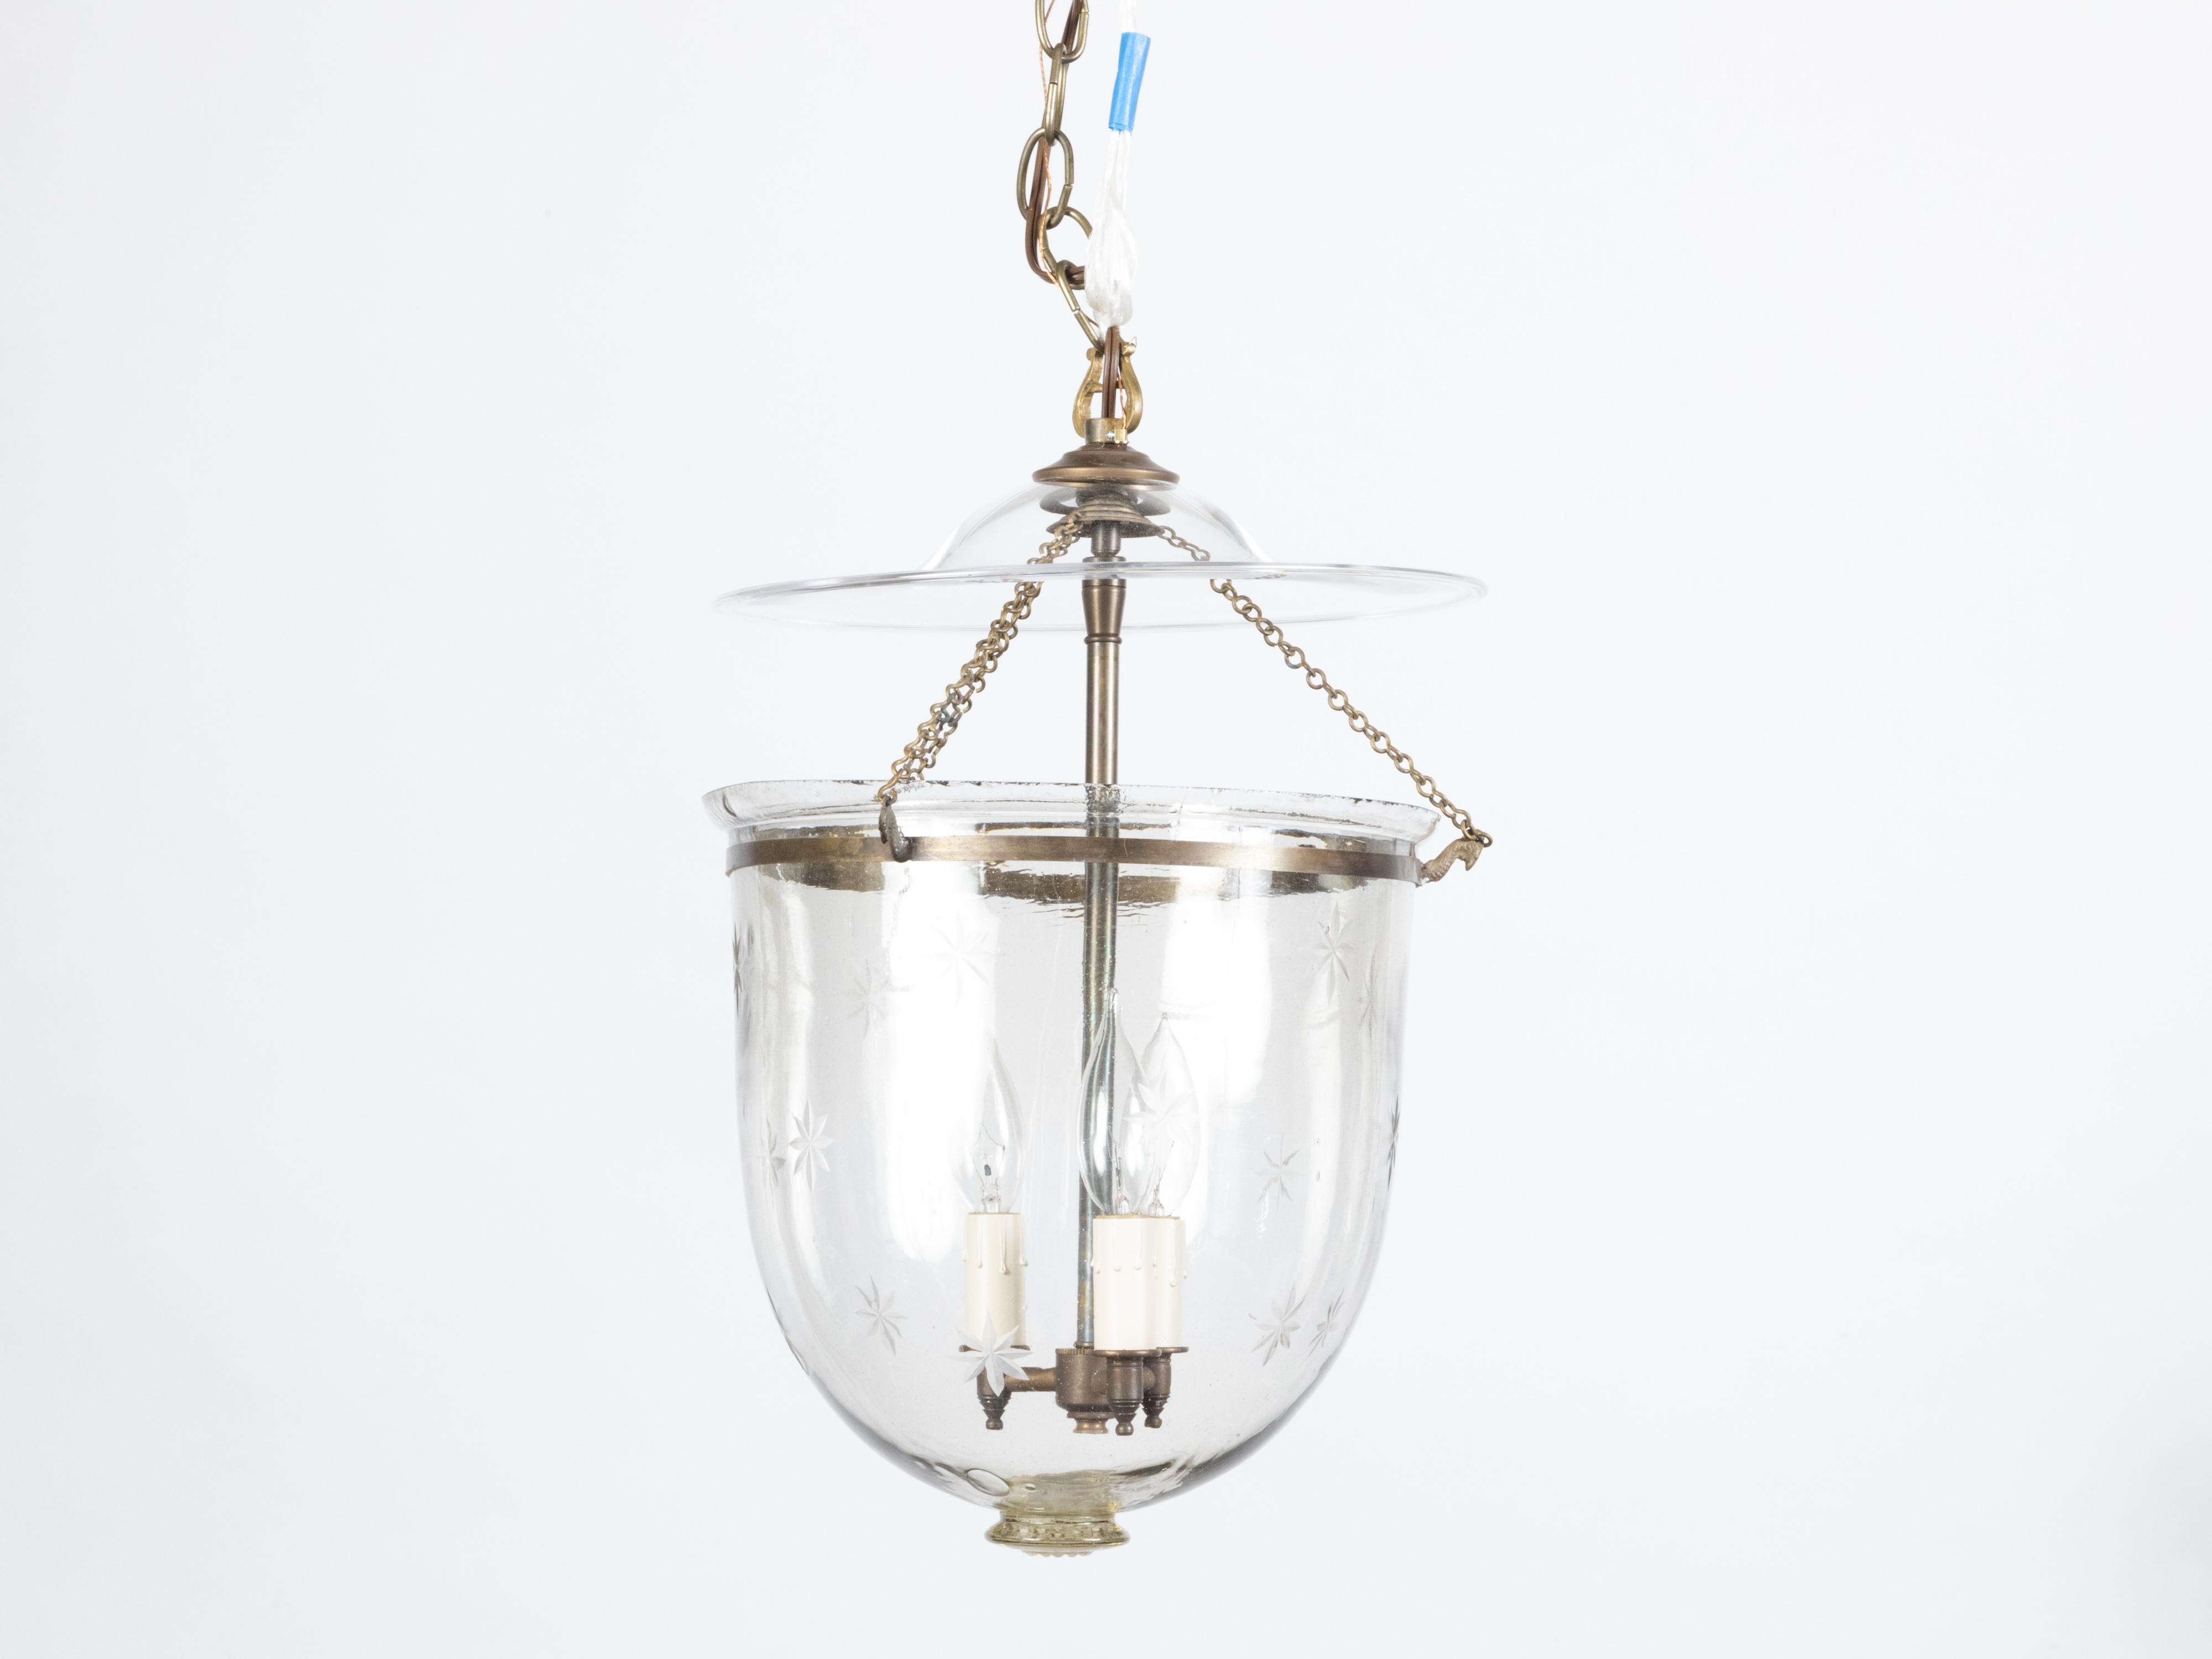 An English bell jar light fixture from the early 20th century, with three lights and etched stars. Created in England at the Turn of the Century, this bell jar light fixture features a glass body adorned with discreet etched star motifs, securing